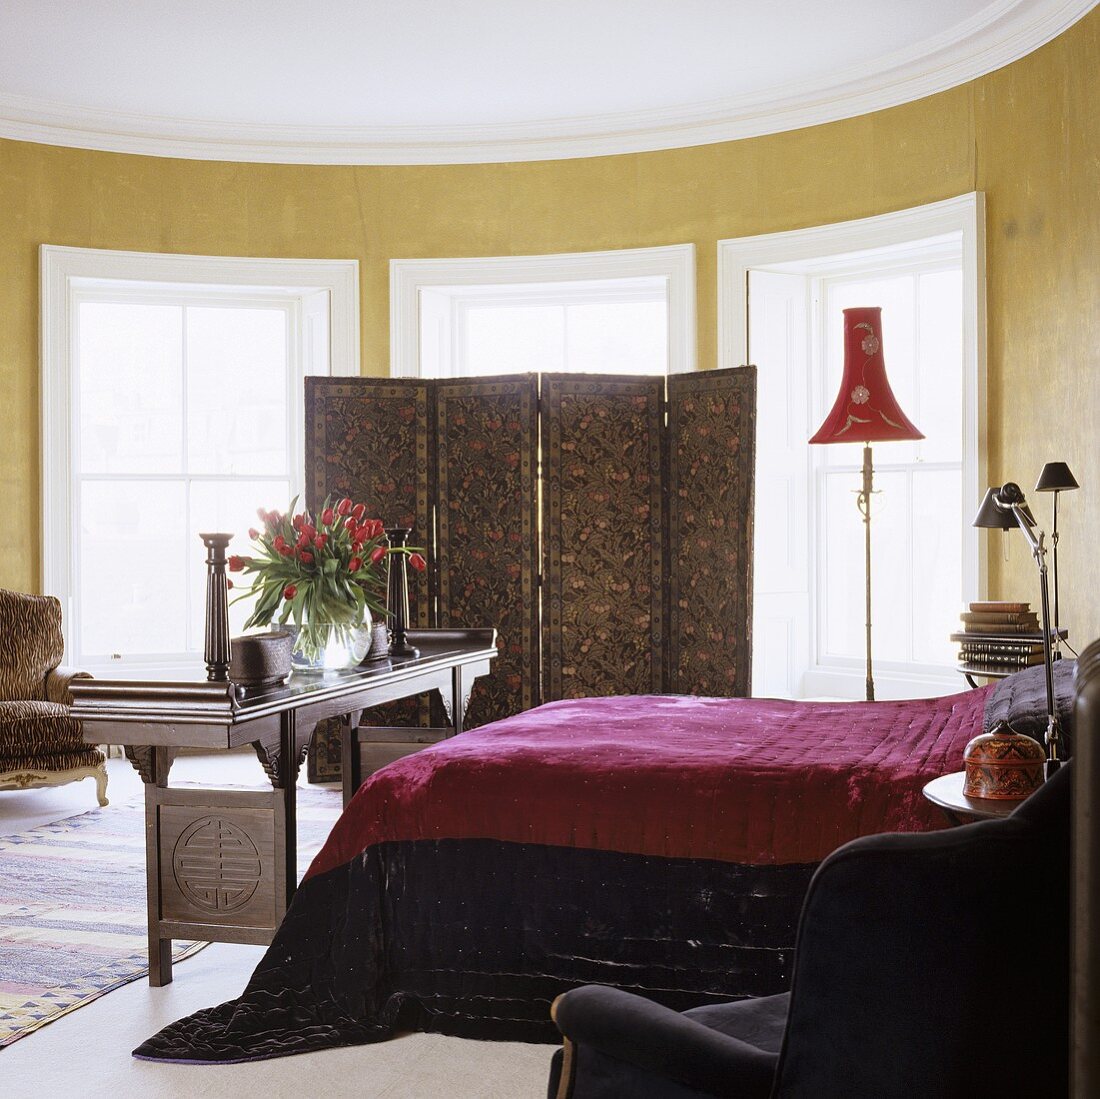 A turret bedroom with gold-painted walls and a paravent in front of the window